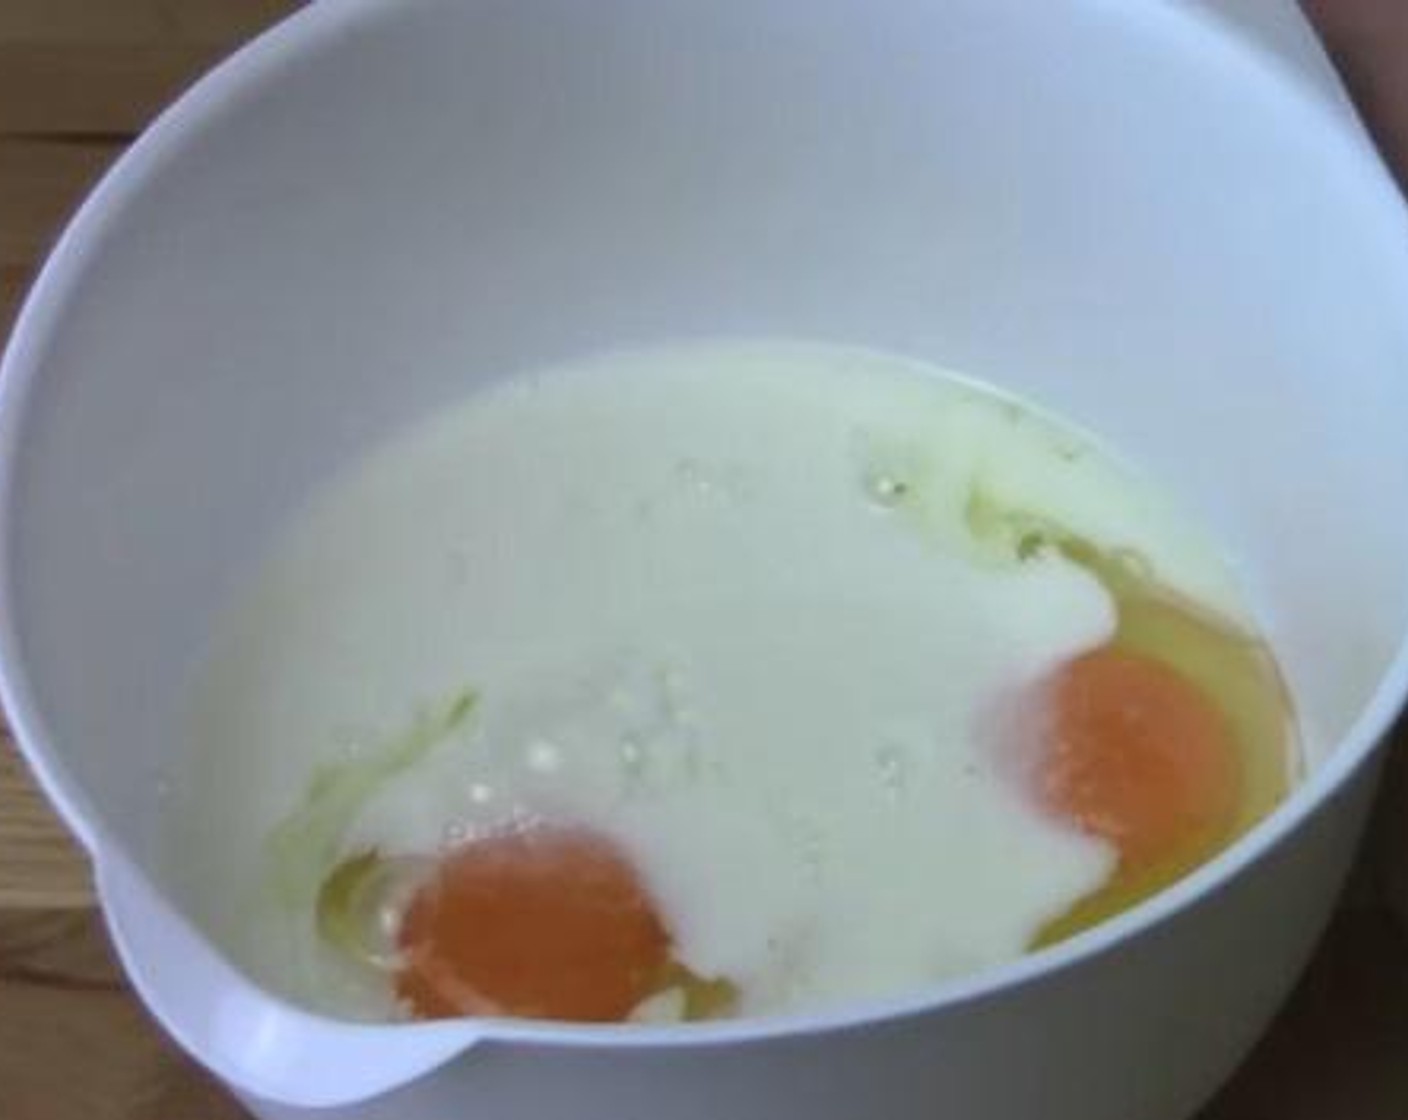 step 3 In a separate bowl, add and mix the Eggs (2), Granulated Sugar (1/4 cup), and Milk (3/4 cup).